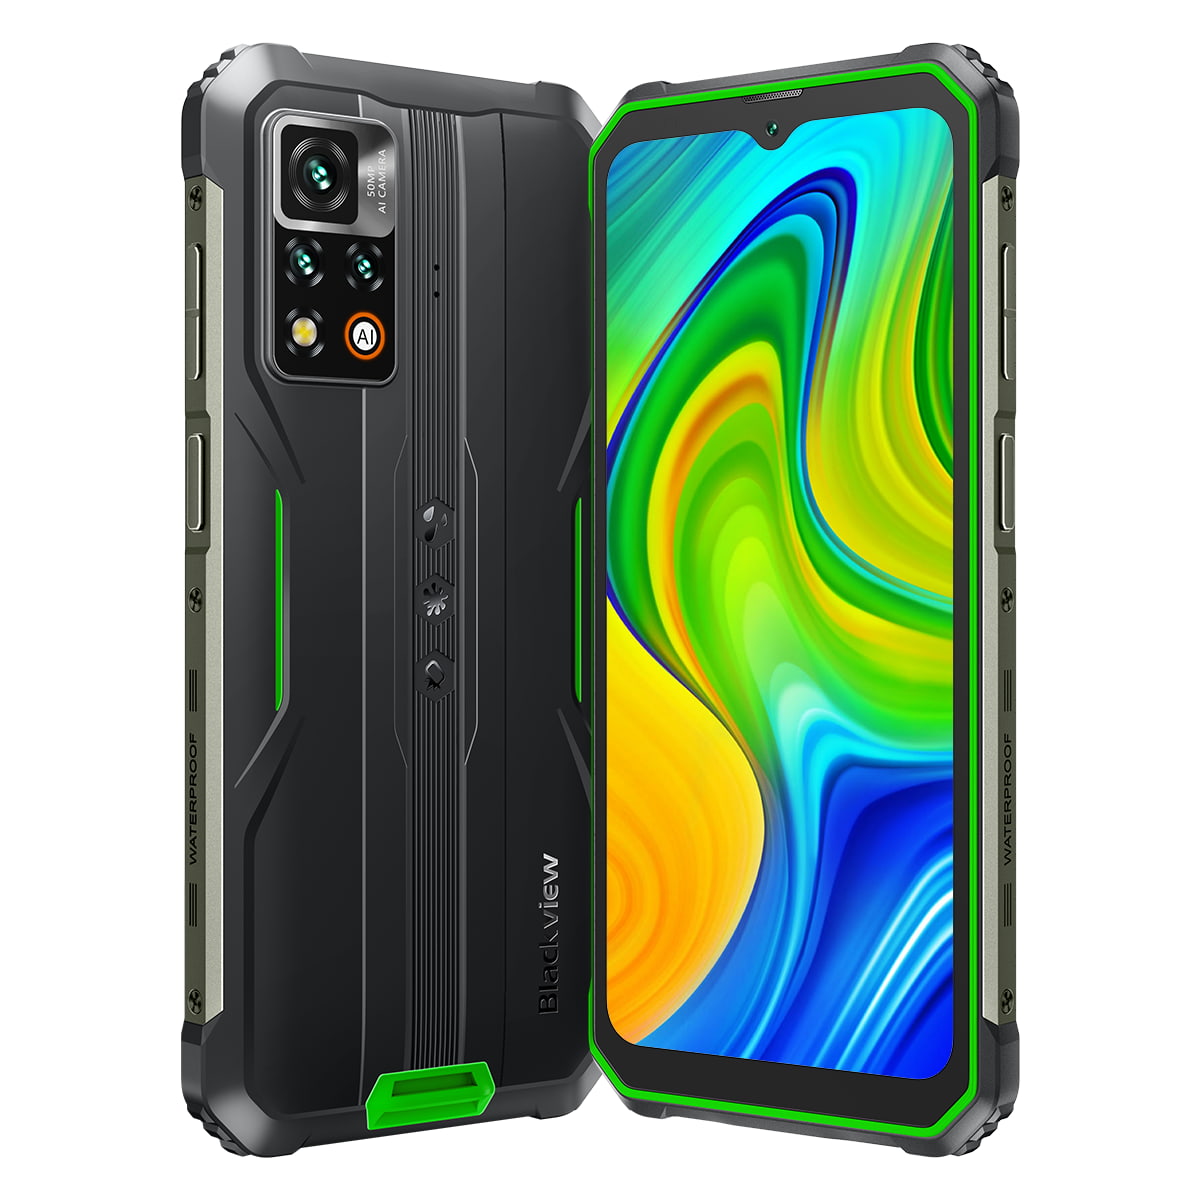 Blackview BV9200 Smartphone Rugged - 2023 Nuovi Lanci - Android 12, Photo 50 Mpx,NFC,8+256GB,Ricarica wireless